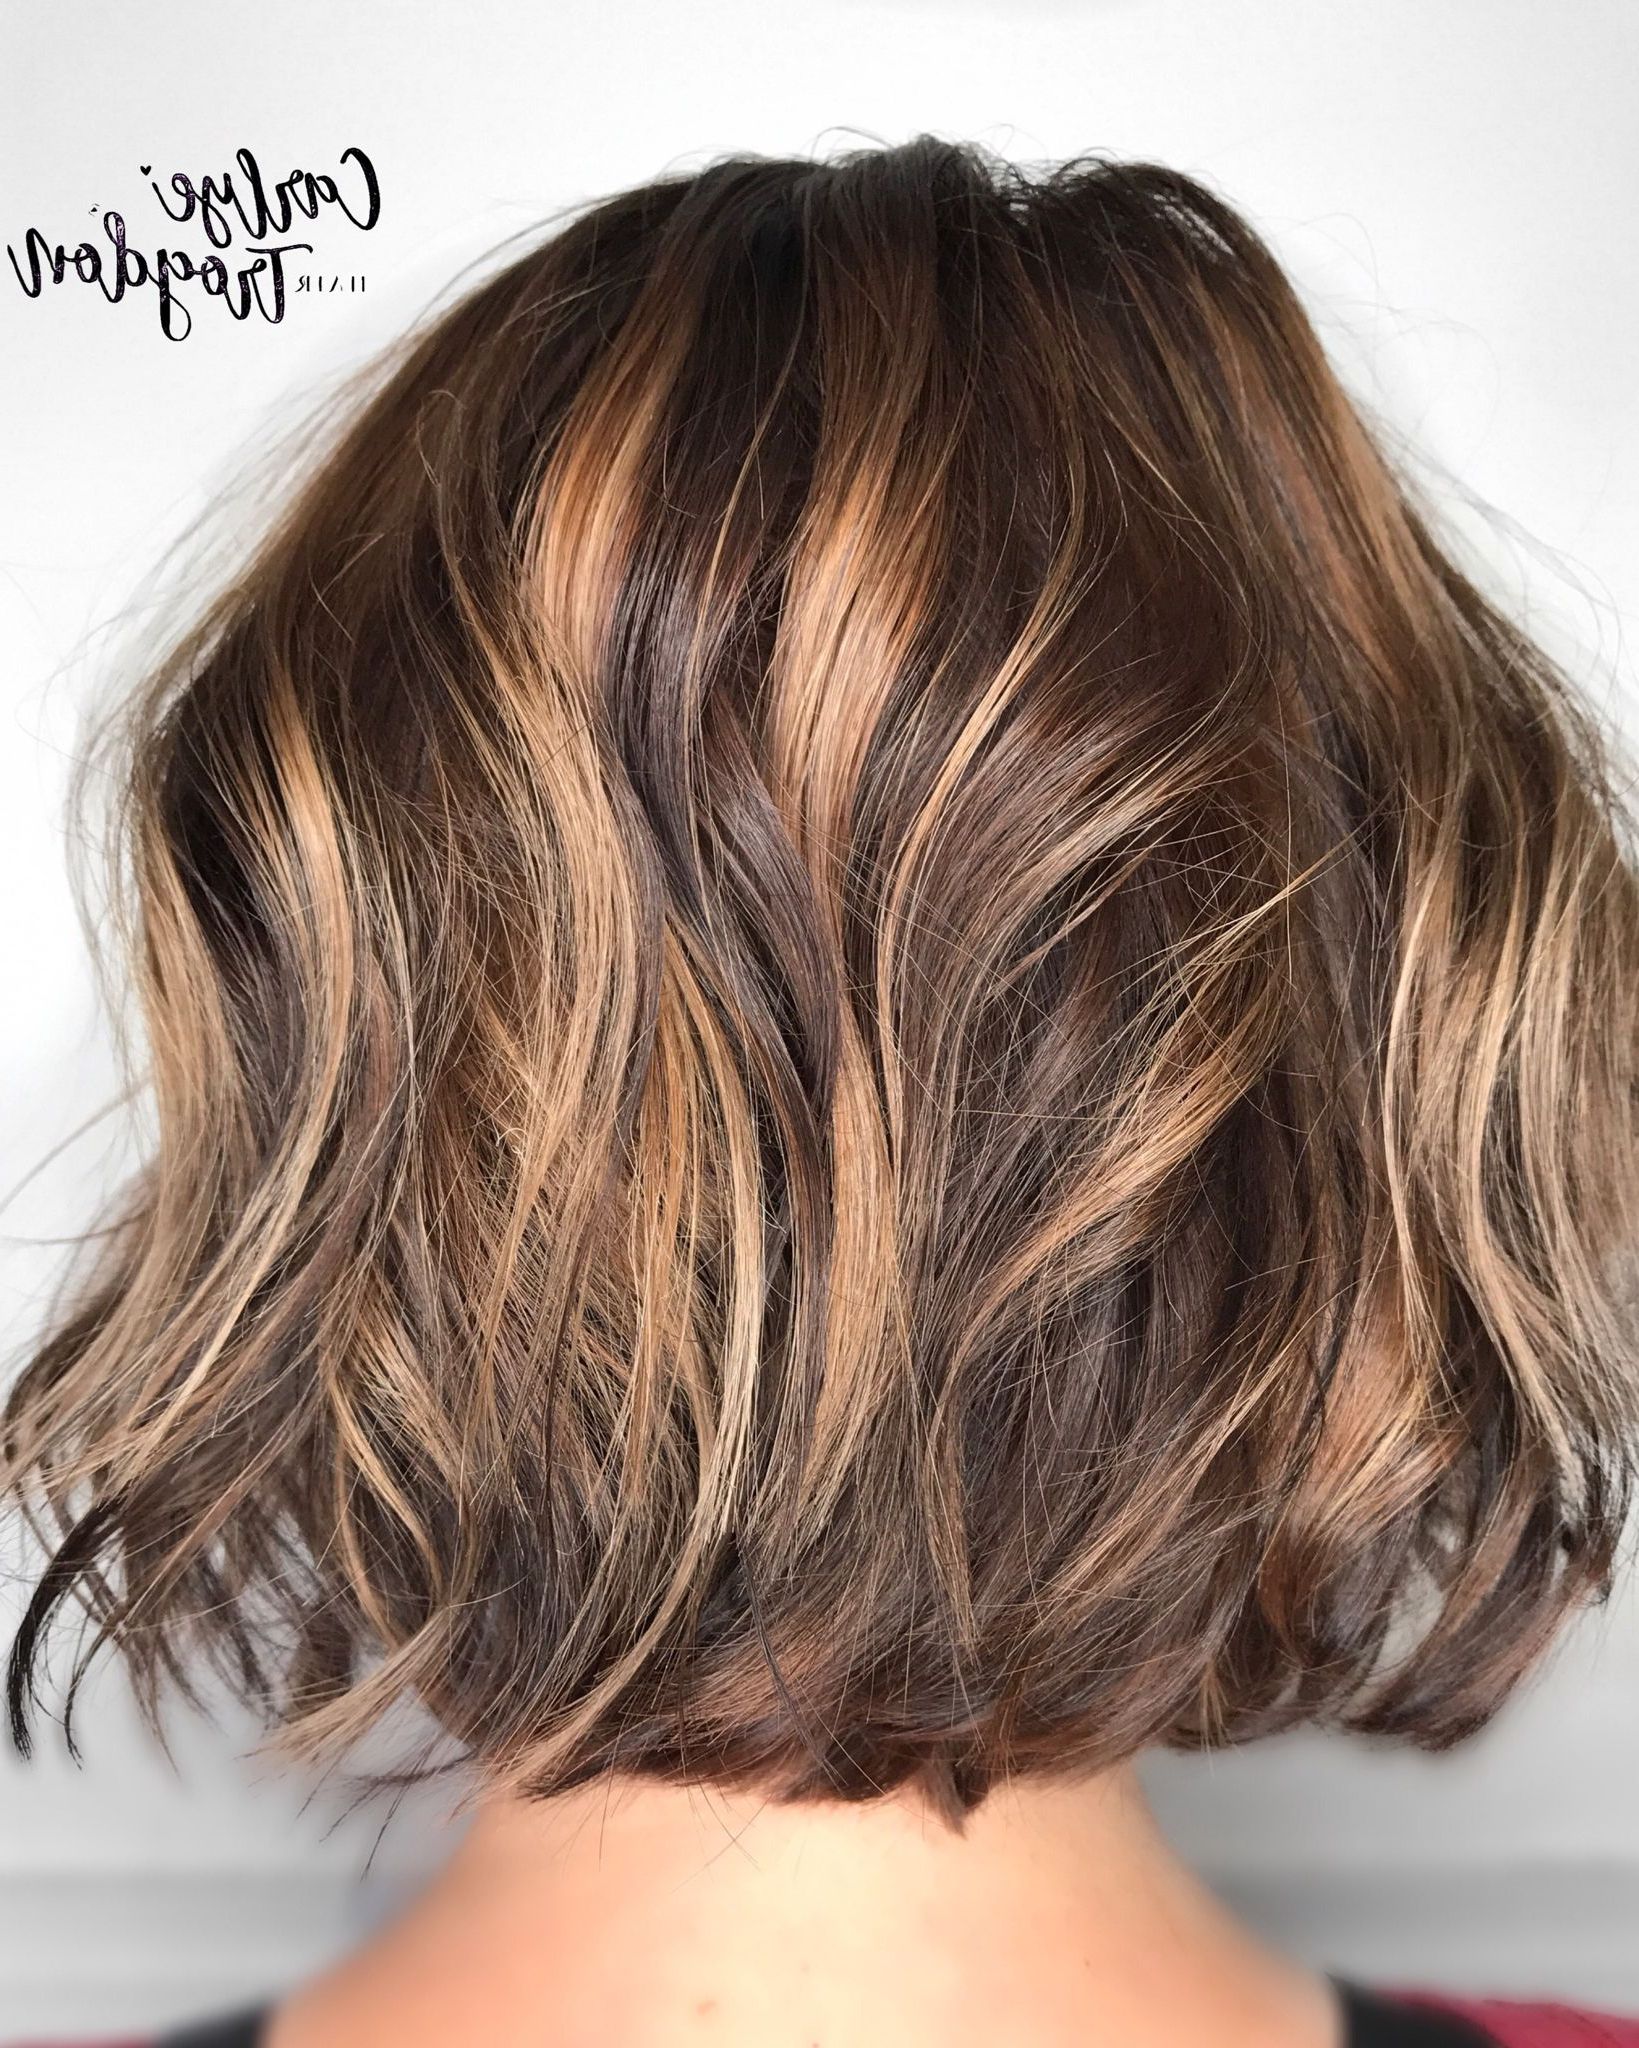 Short Textured Bob With Sun Kissed Balayage Throughout In In Short Textured Hairstyles With Balayage (View 4 of 20)